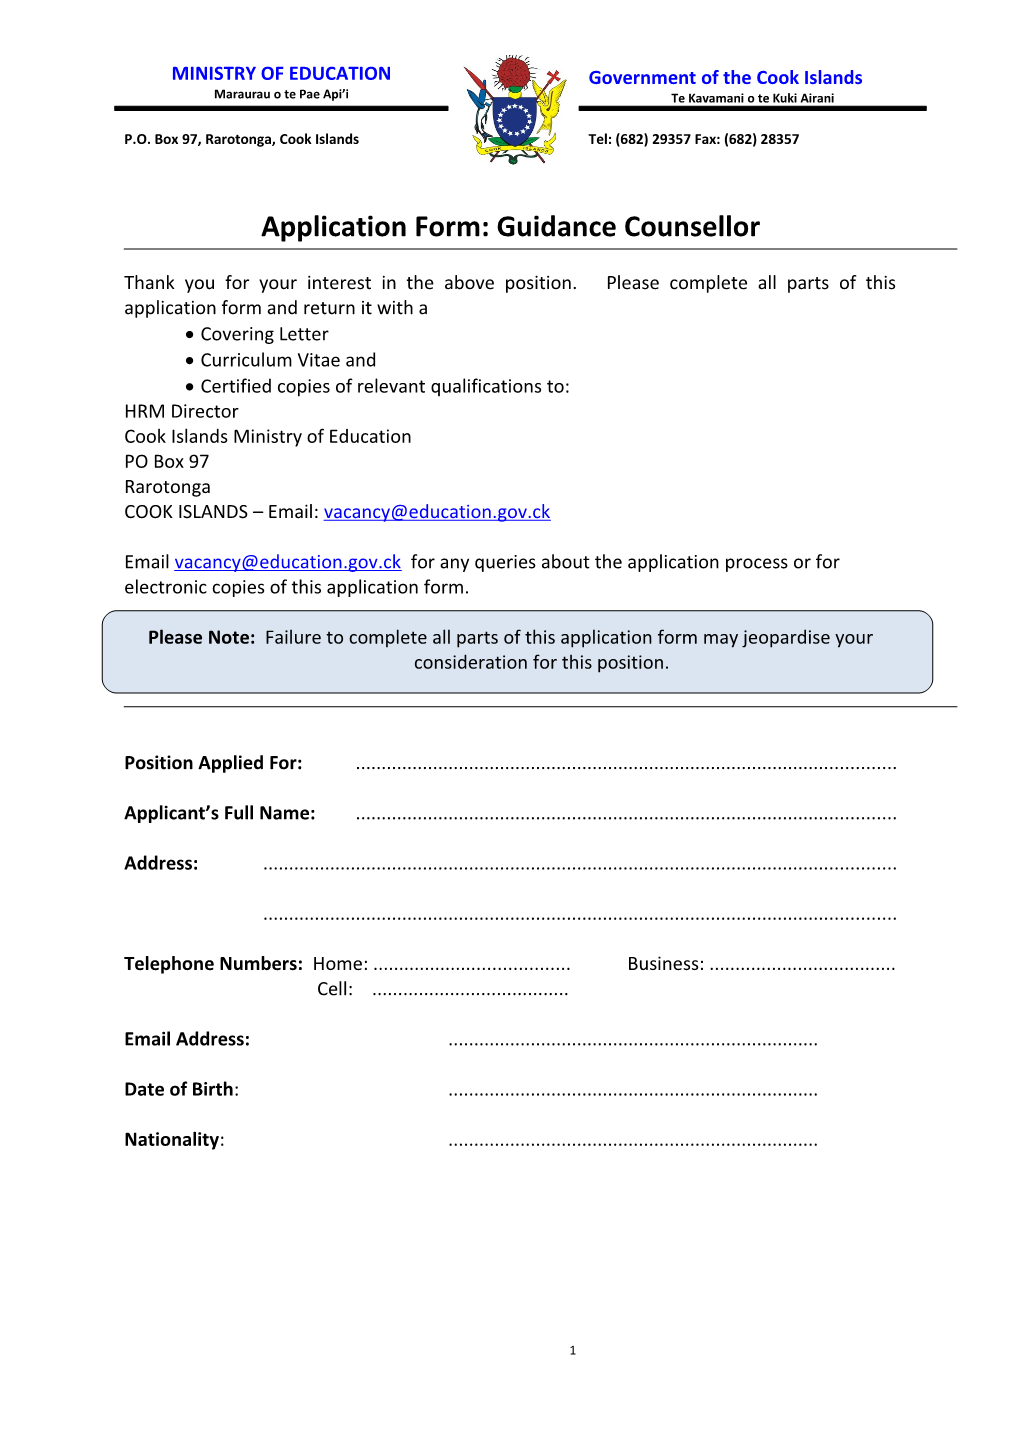 Application Form: Guidance Counsellor